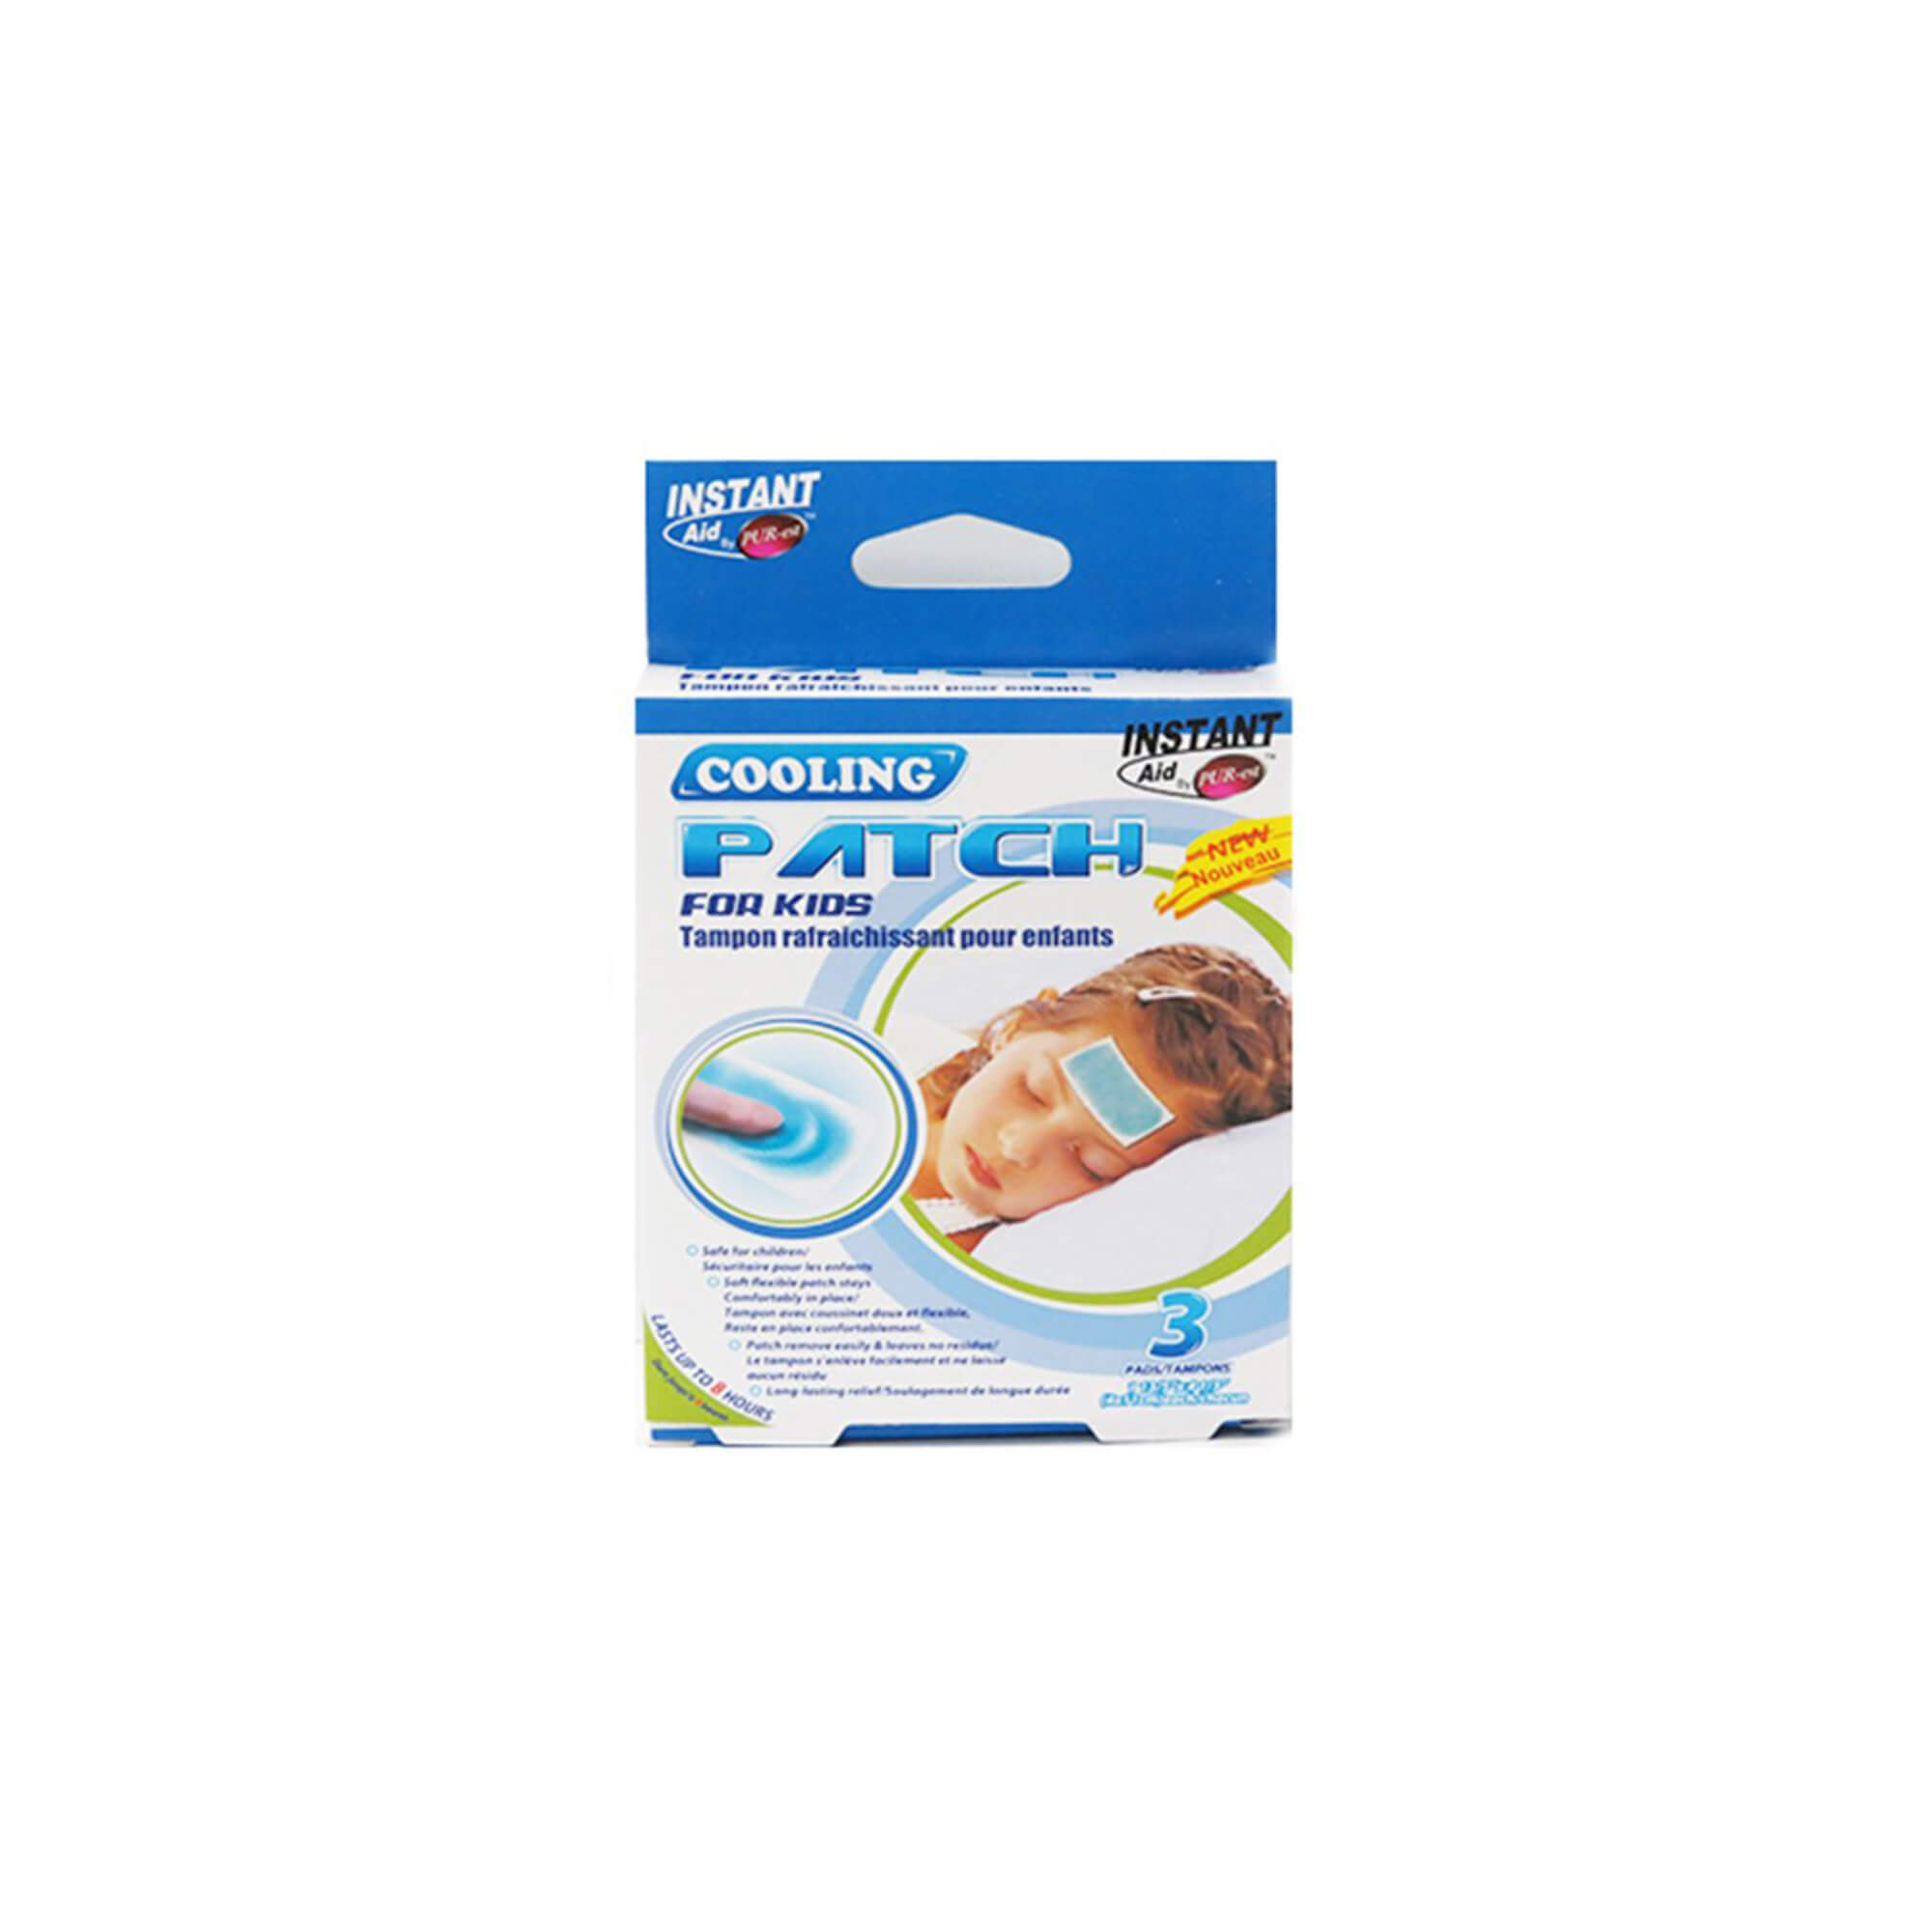 Instant Aid Cooling Patch For Kids 3 Pads In 1 Pk, Pack of 6